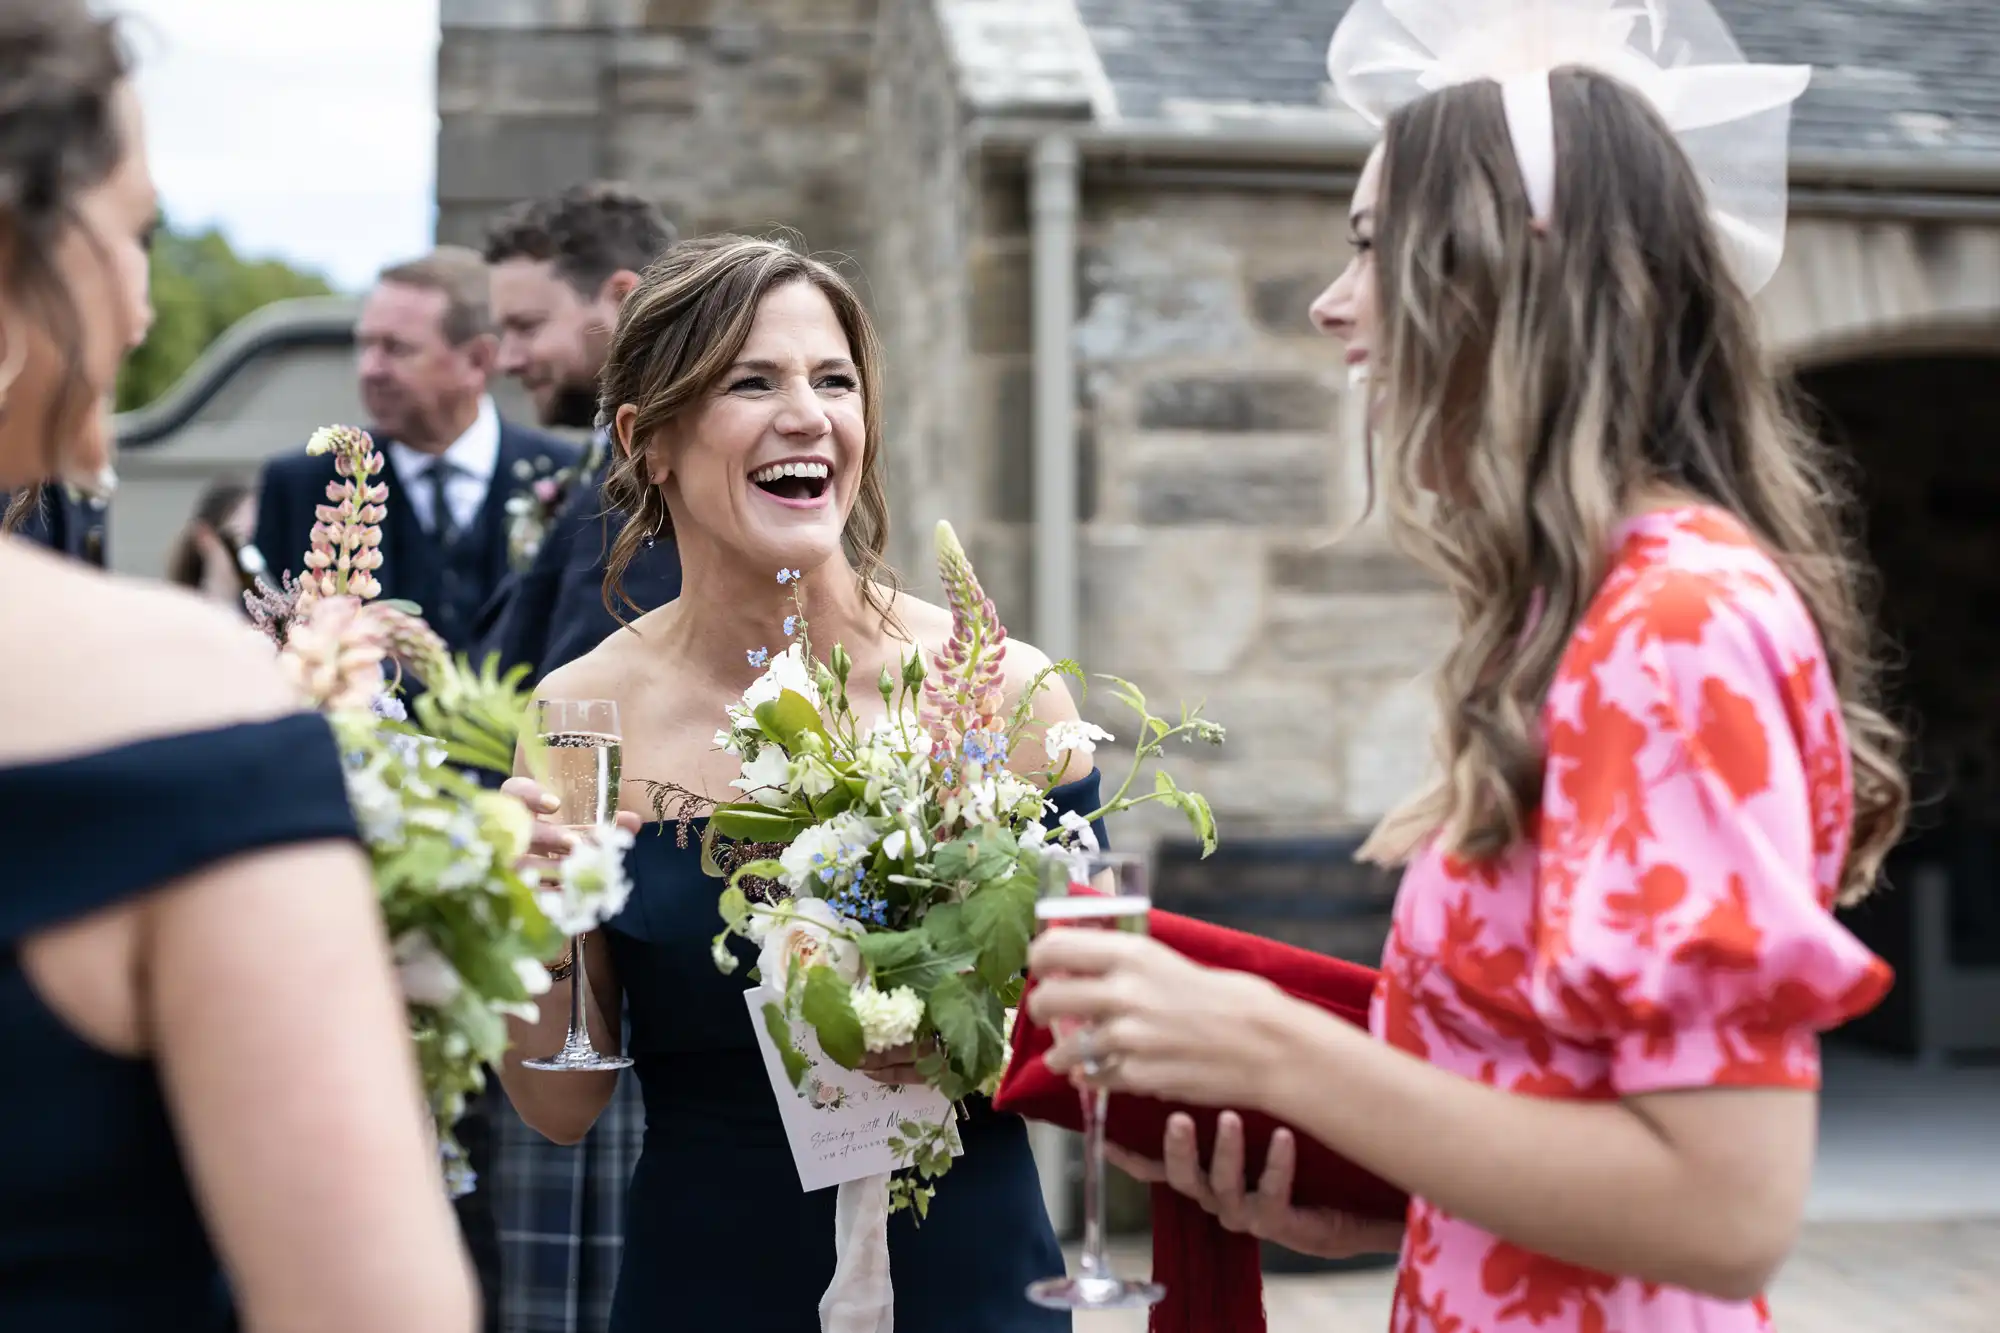 A joyous woman in a white dress holding a champagne glass and flower bouquet laughs with another woman in a red floral dress at a wedding.